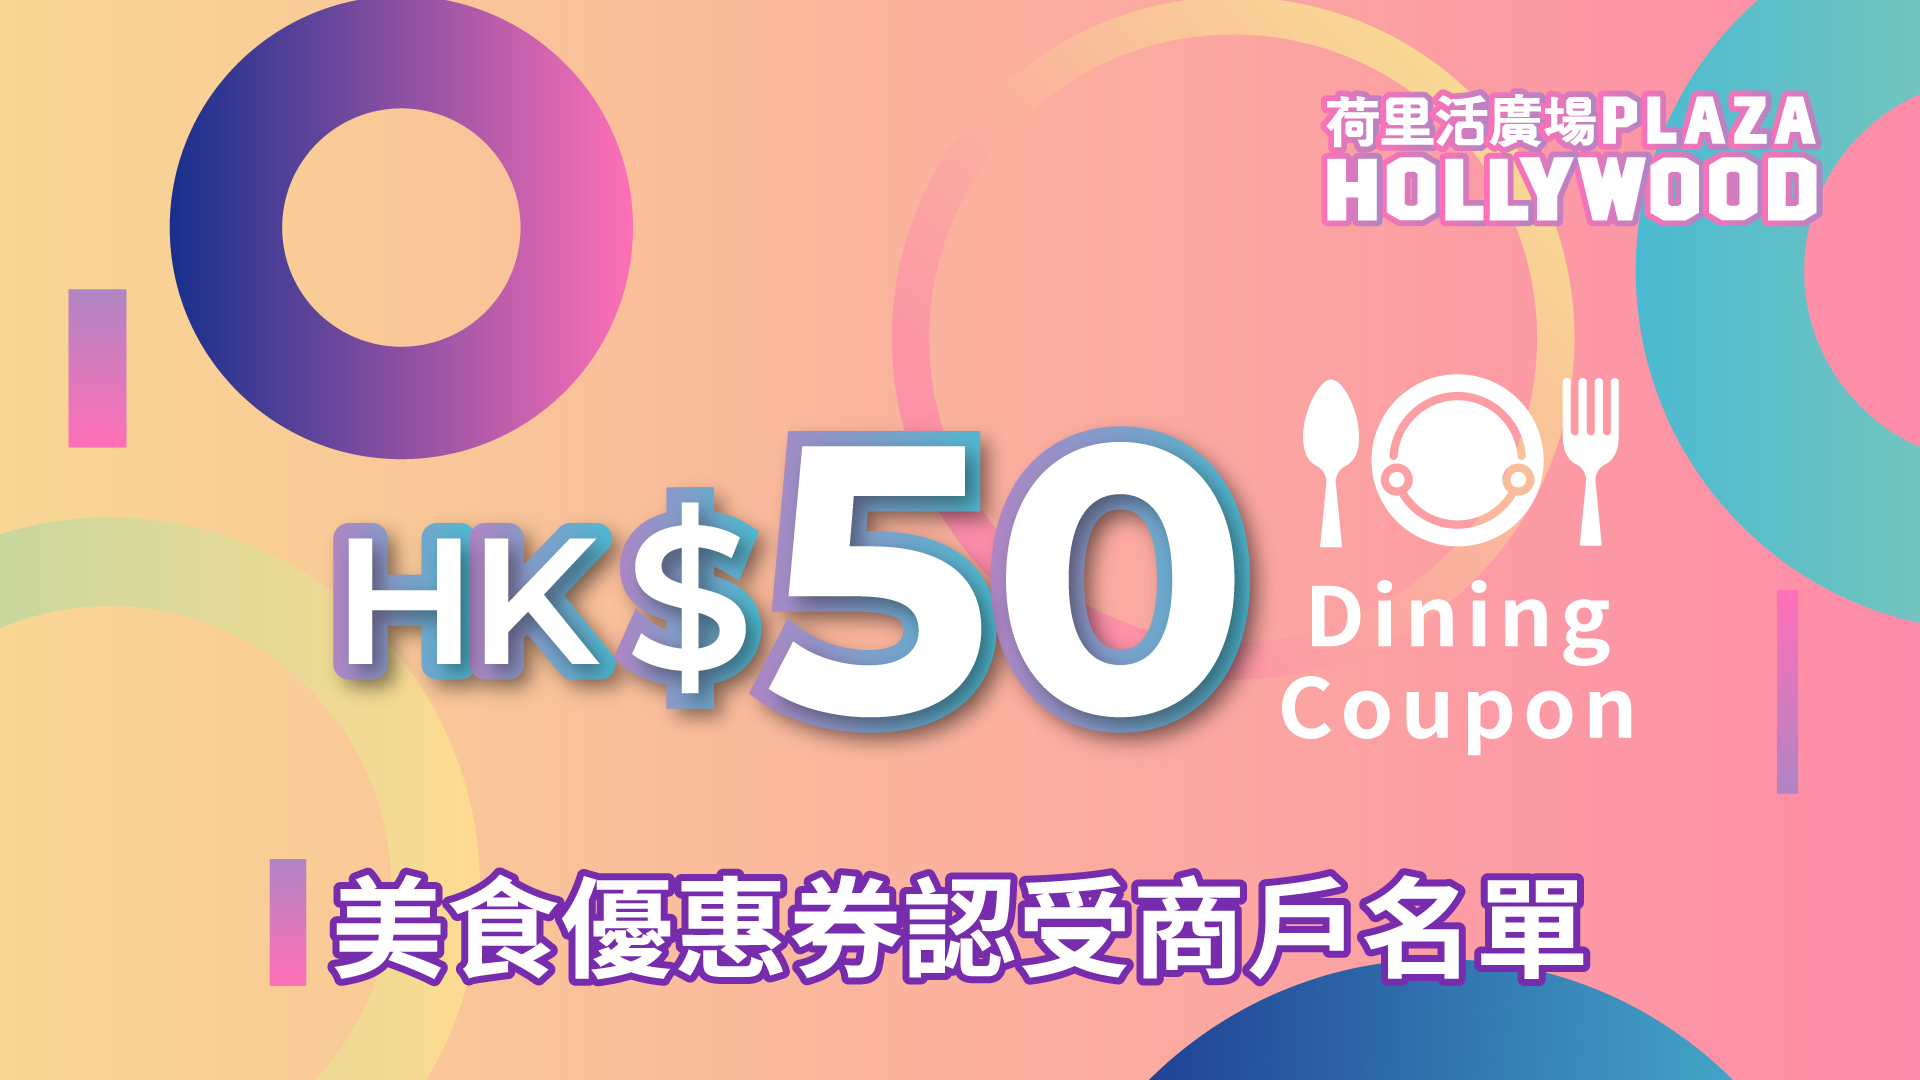 Plaza Hollywood F&B HK$50 Conditional Coupon - Participating designated outlets at Plaza Hollywood